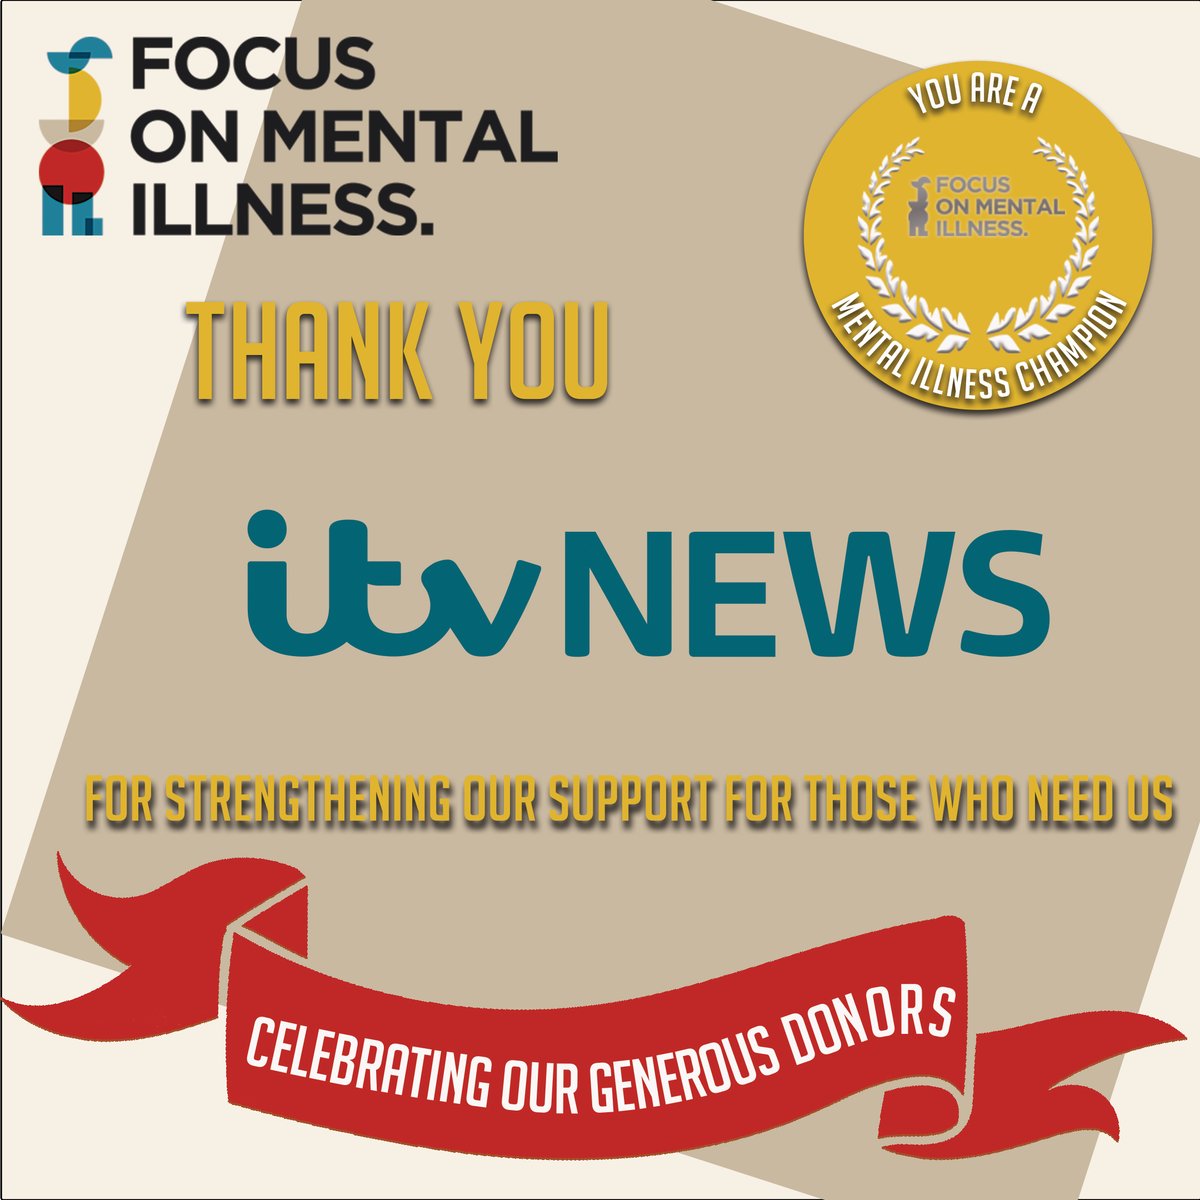 🌟 Flipping the script to spotlight @ITVChannelTV's generosity! 🌟 They didn't hesitate to donate an exclusive behind-the-scenes experience to our silent auction at @LaMoyeGC on May 22. Join us for golf & more!🏌️‍♂️📺 Details & registration: ow.ly/vWZf50Rn79E #CharityGolf #ITV